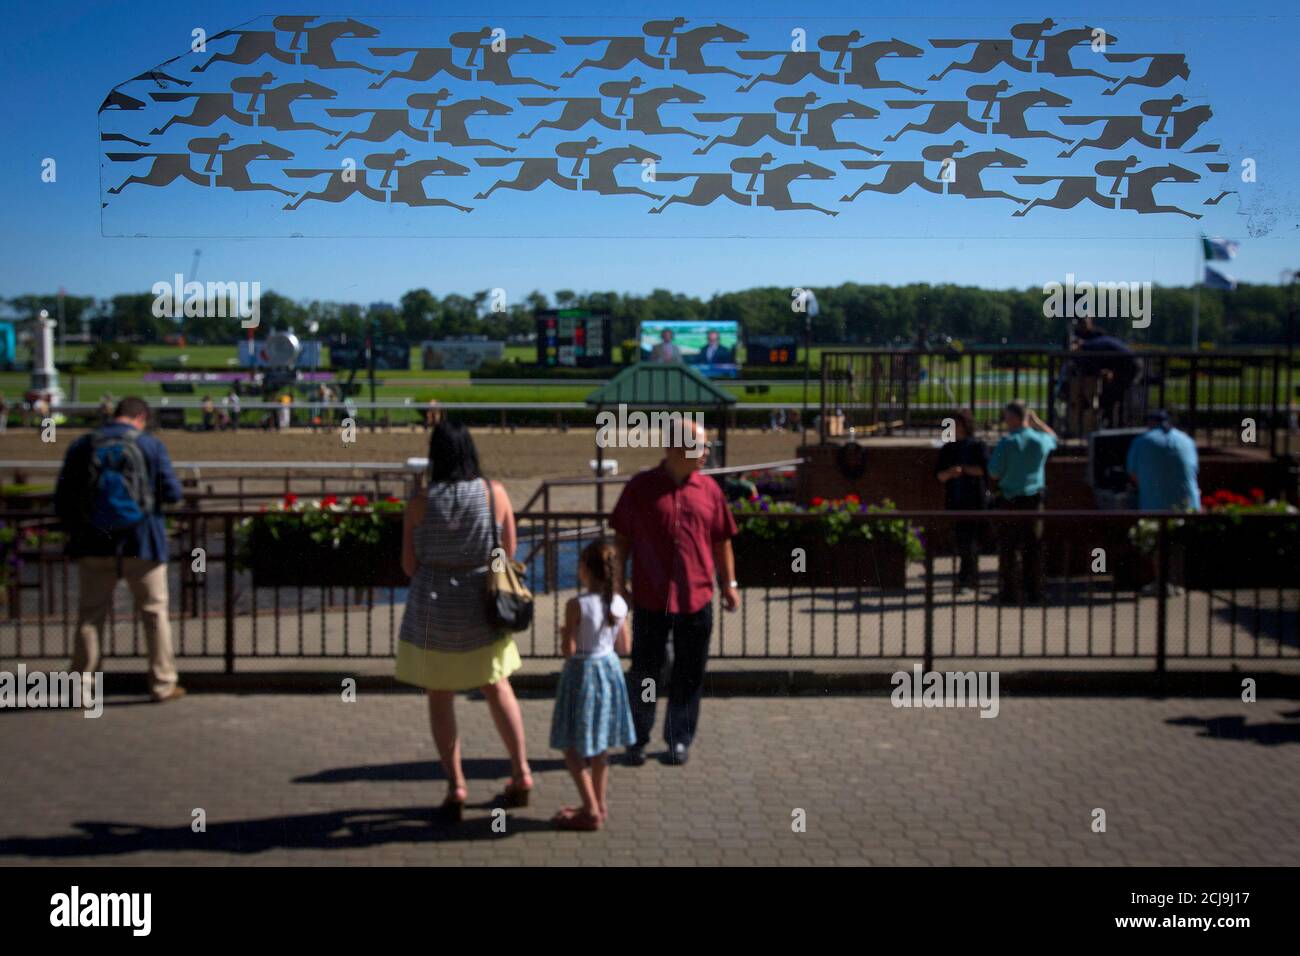 Horseracing stickers are pictured on a window of the grandstand as people walk past, before the 2014 Belmont Stakes in Elmont, New York June 7, 2014.   REUTERS/Carlo Allegri (UNITED STATES - Tags: SPORT HORSE RACING) Stock Photo